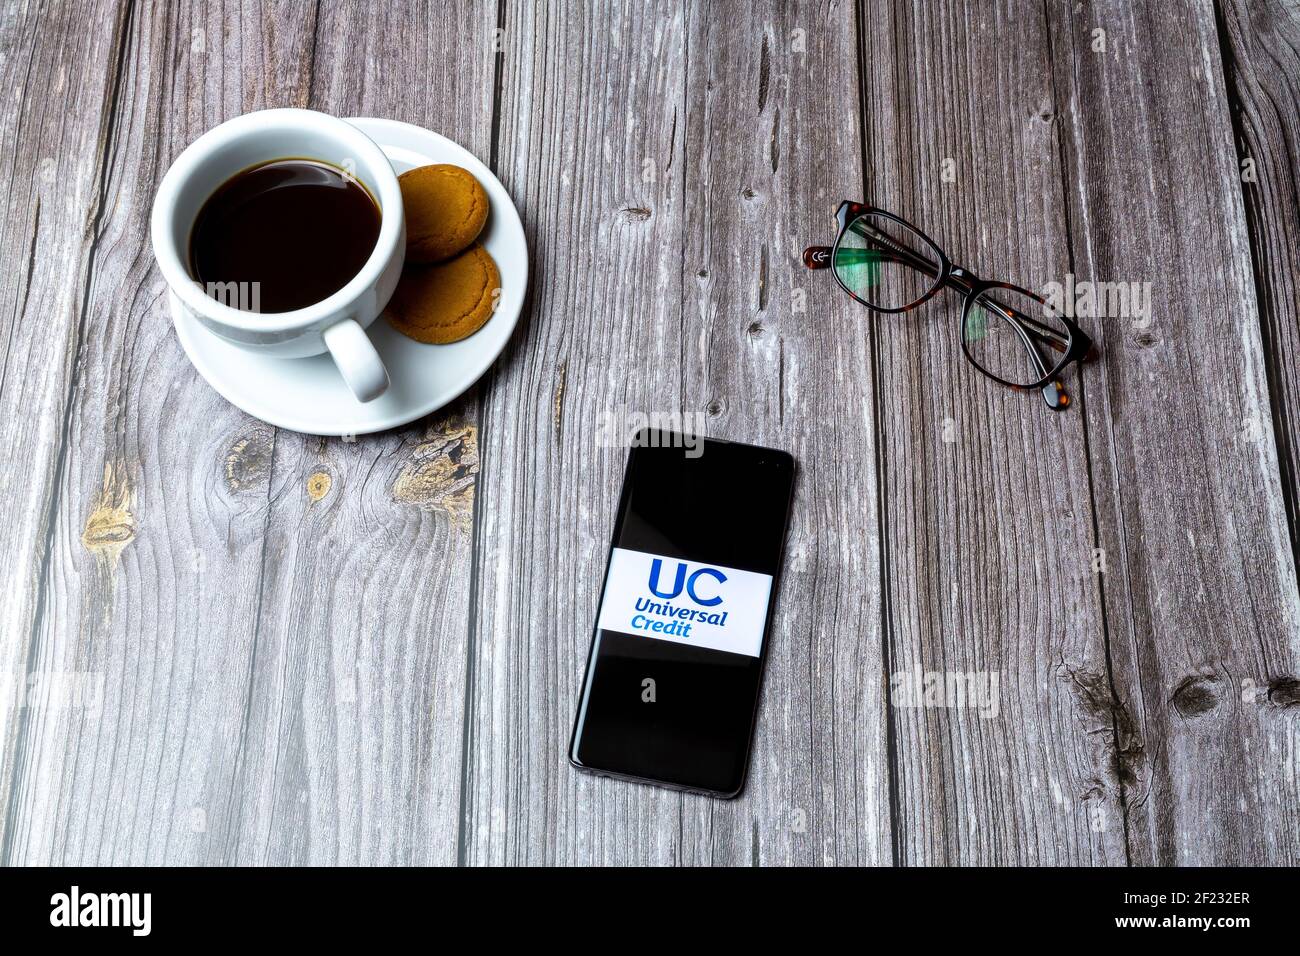 A Mobile phone or cell phone laid on a wooden table with the Universal Credit app open on screen Stock Photo